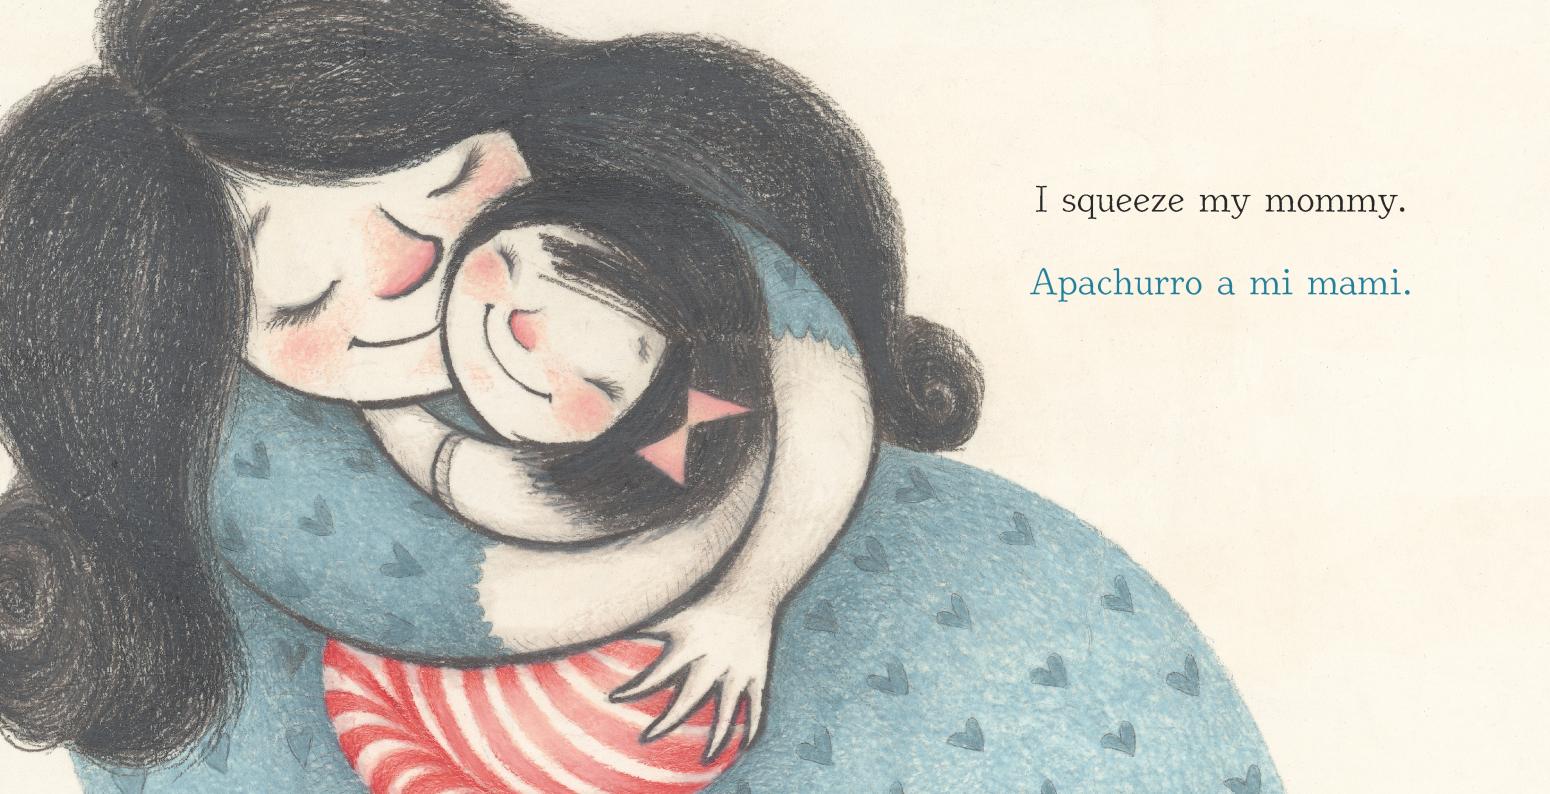 Alma and her mother hugging each other, next to the words "I squeeze my mommy/Appachurro a mi mami."